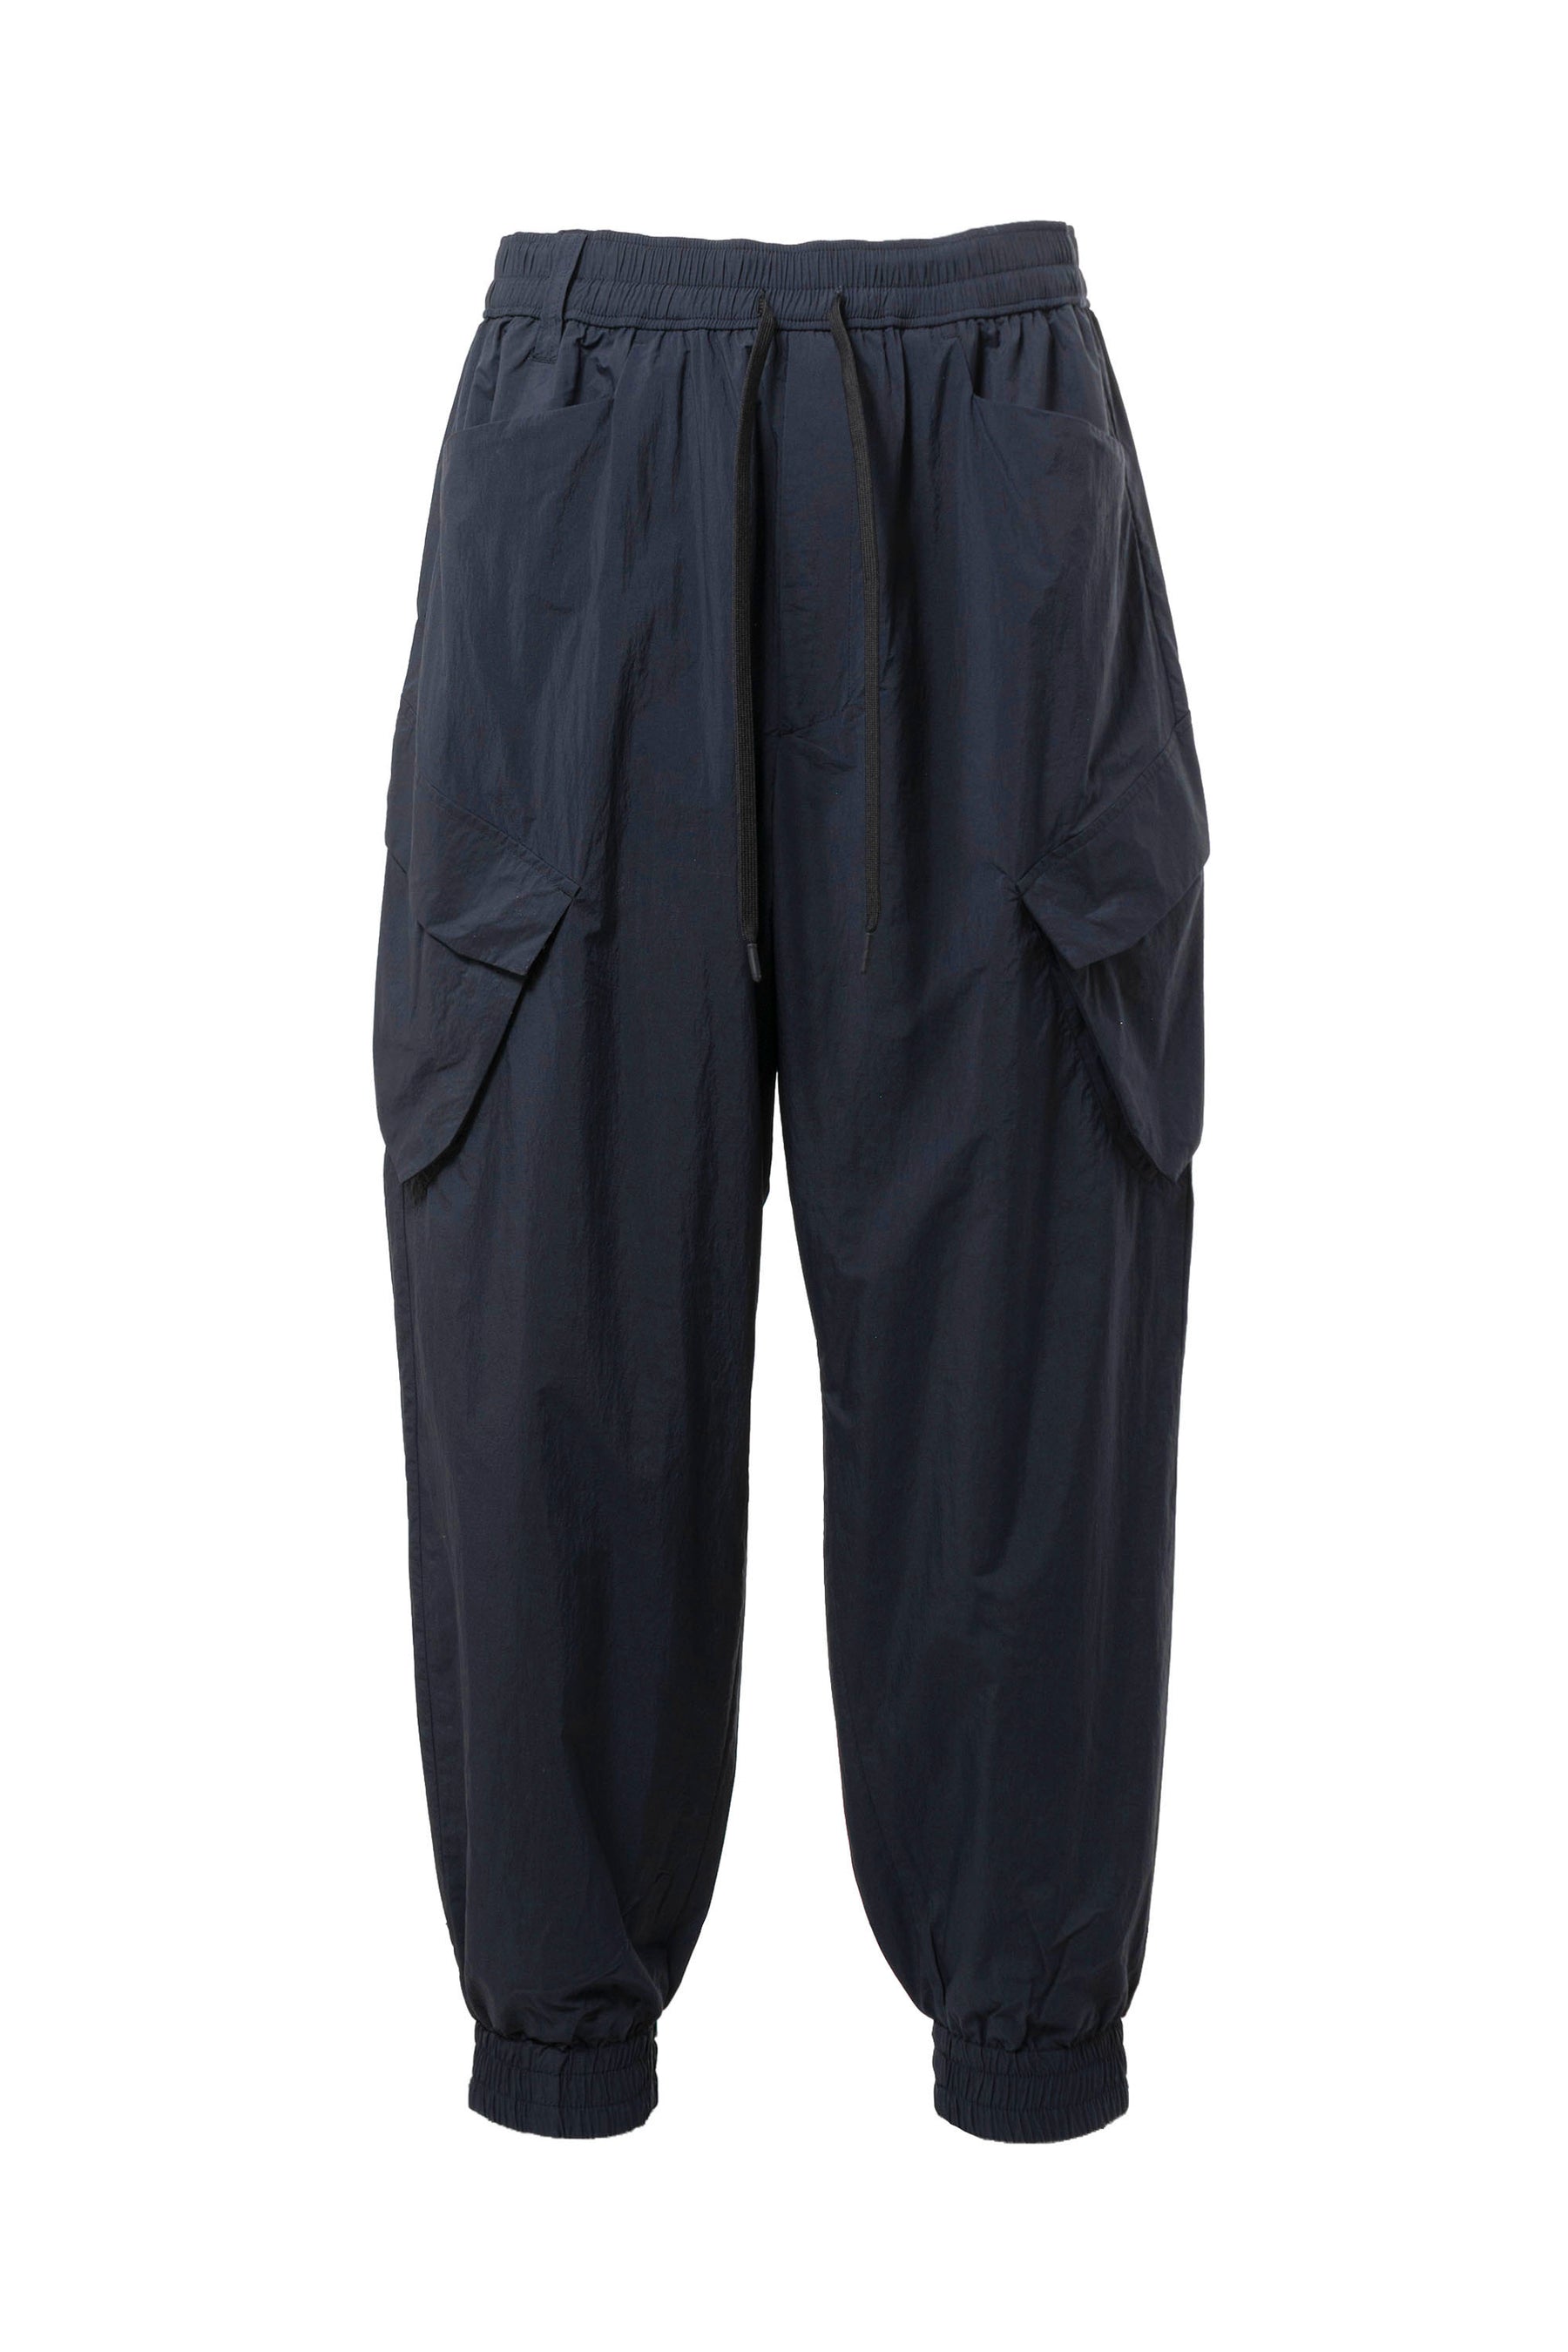 BLK White Mountaineering WIDE CARGO JOGGER PANTS / BLK - NUBIAN